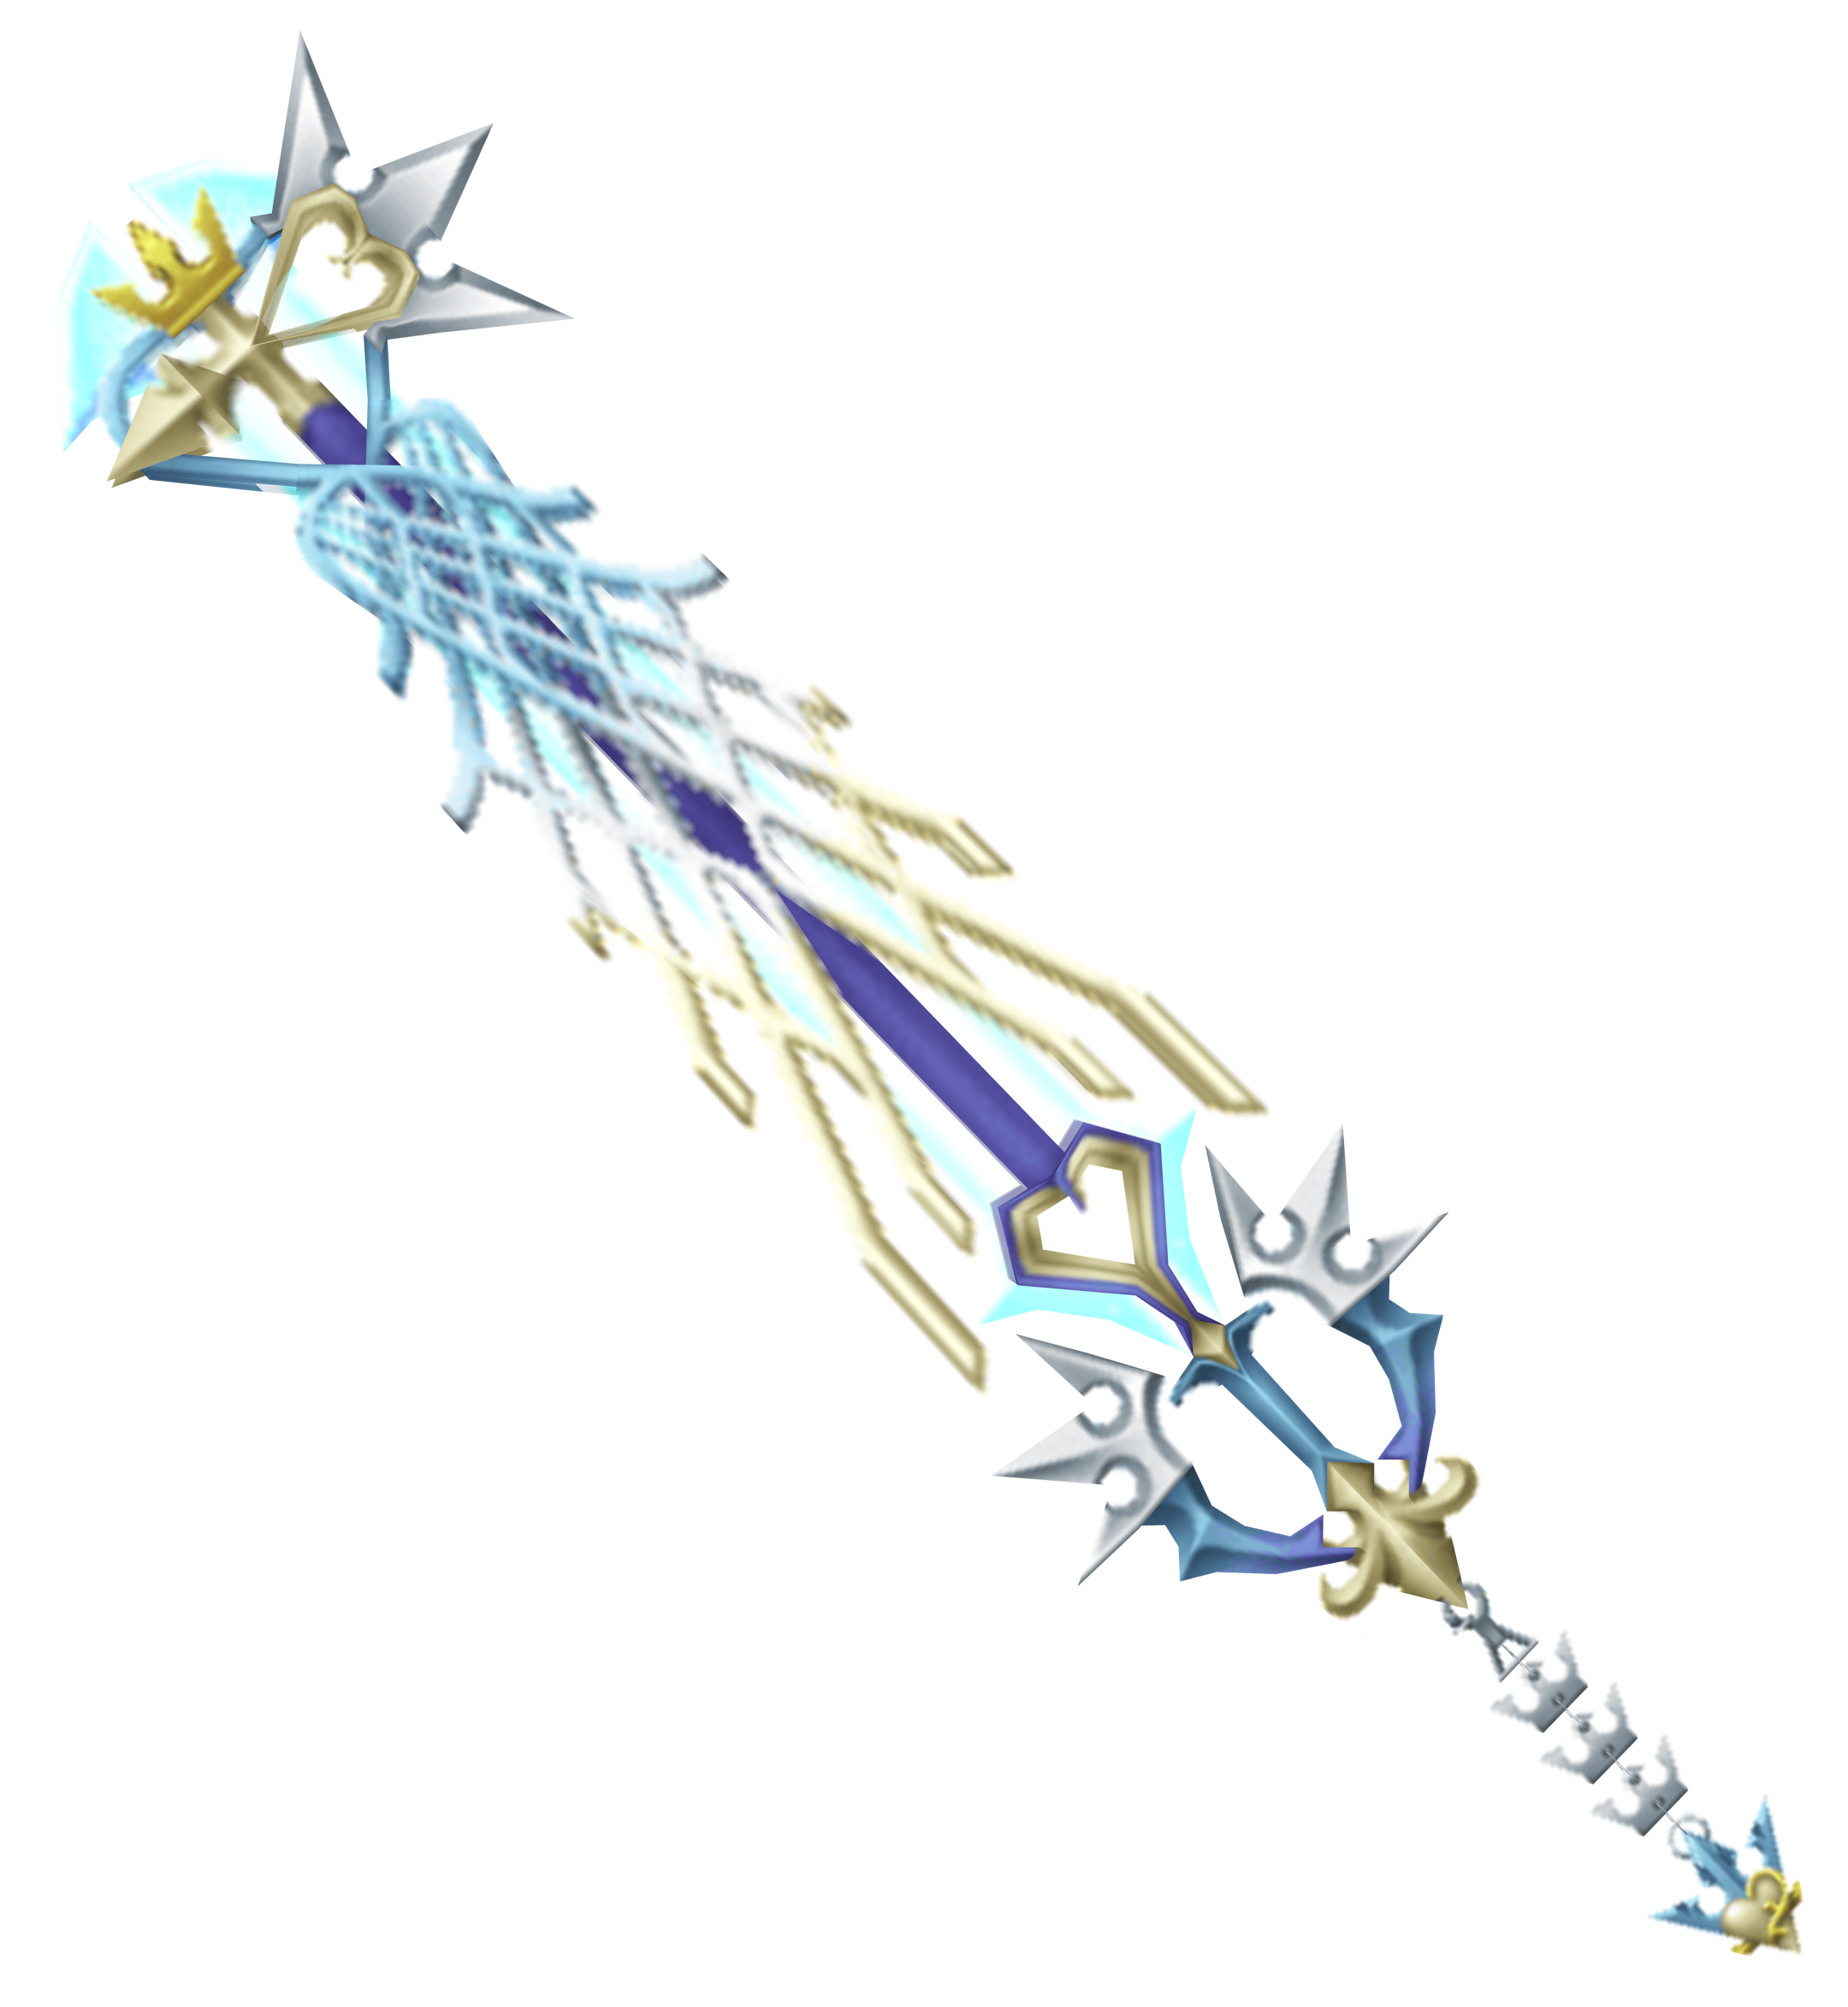 Ultima_Weapon_KHII.png